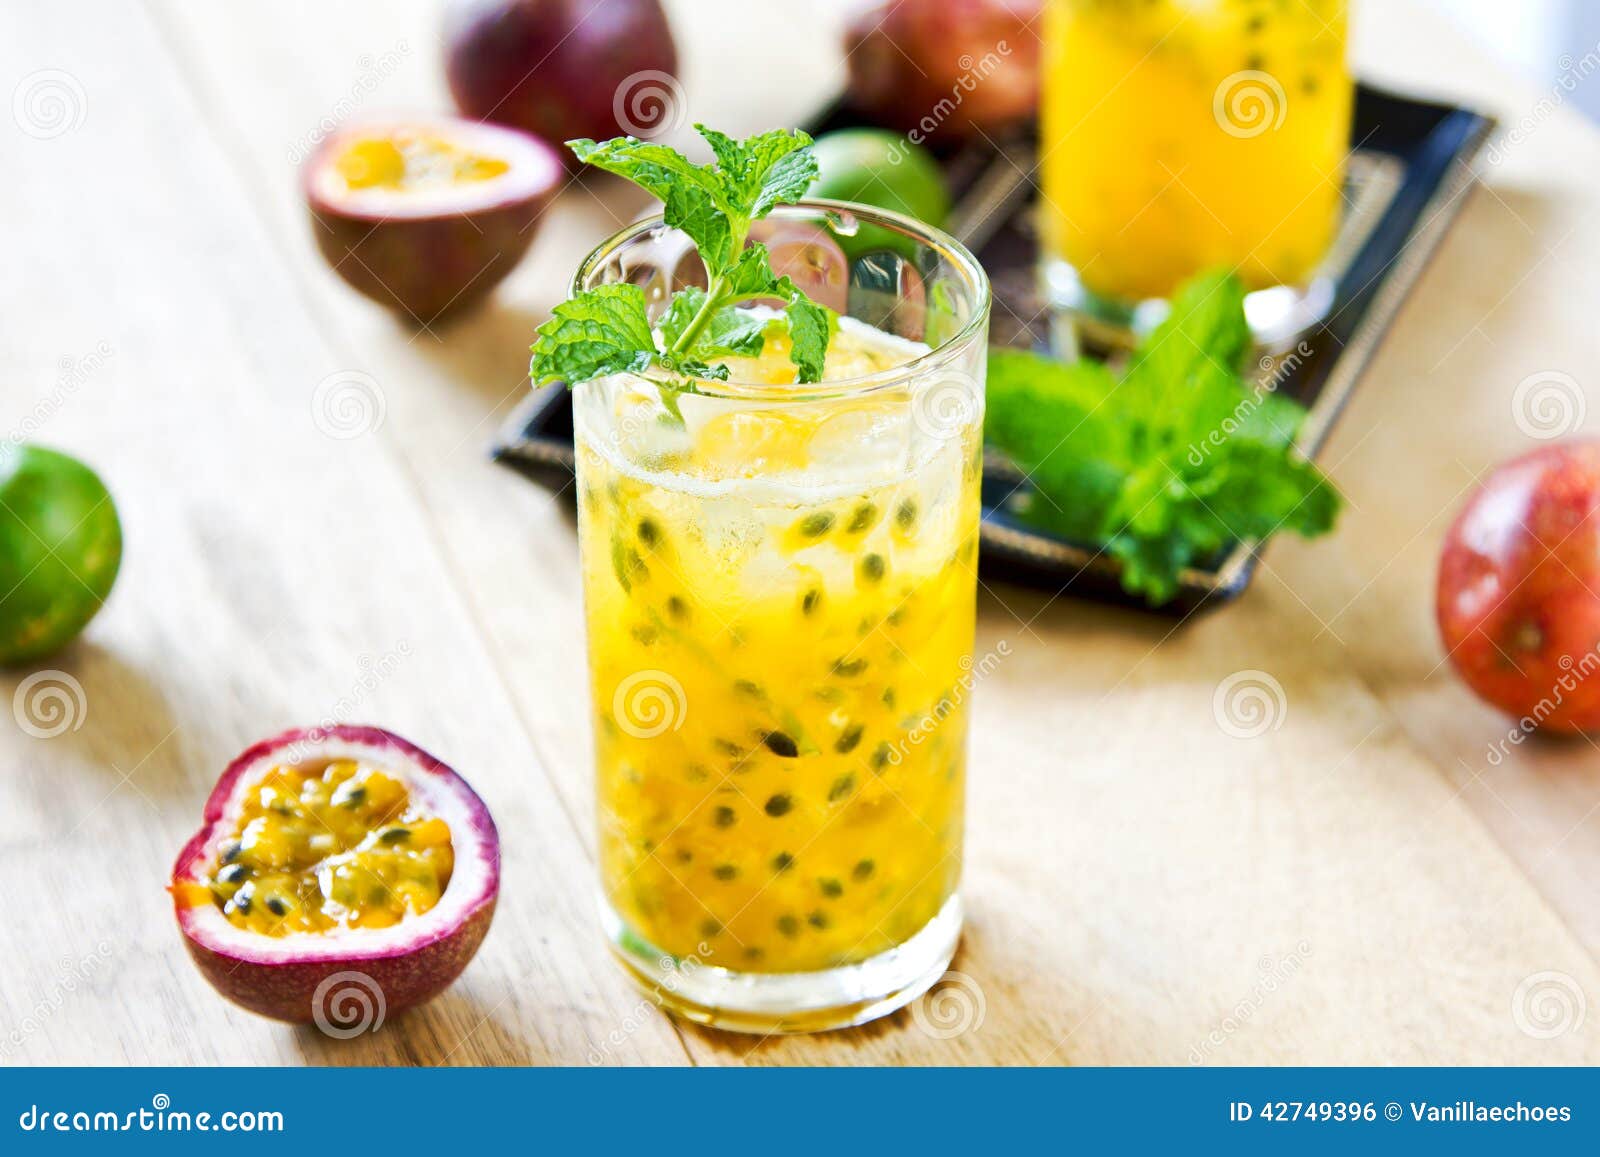 passion fruit with lychee mojito